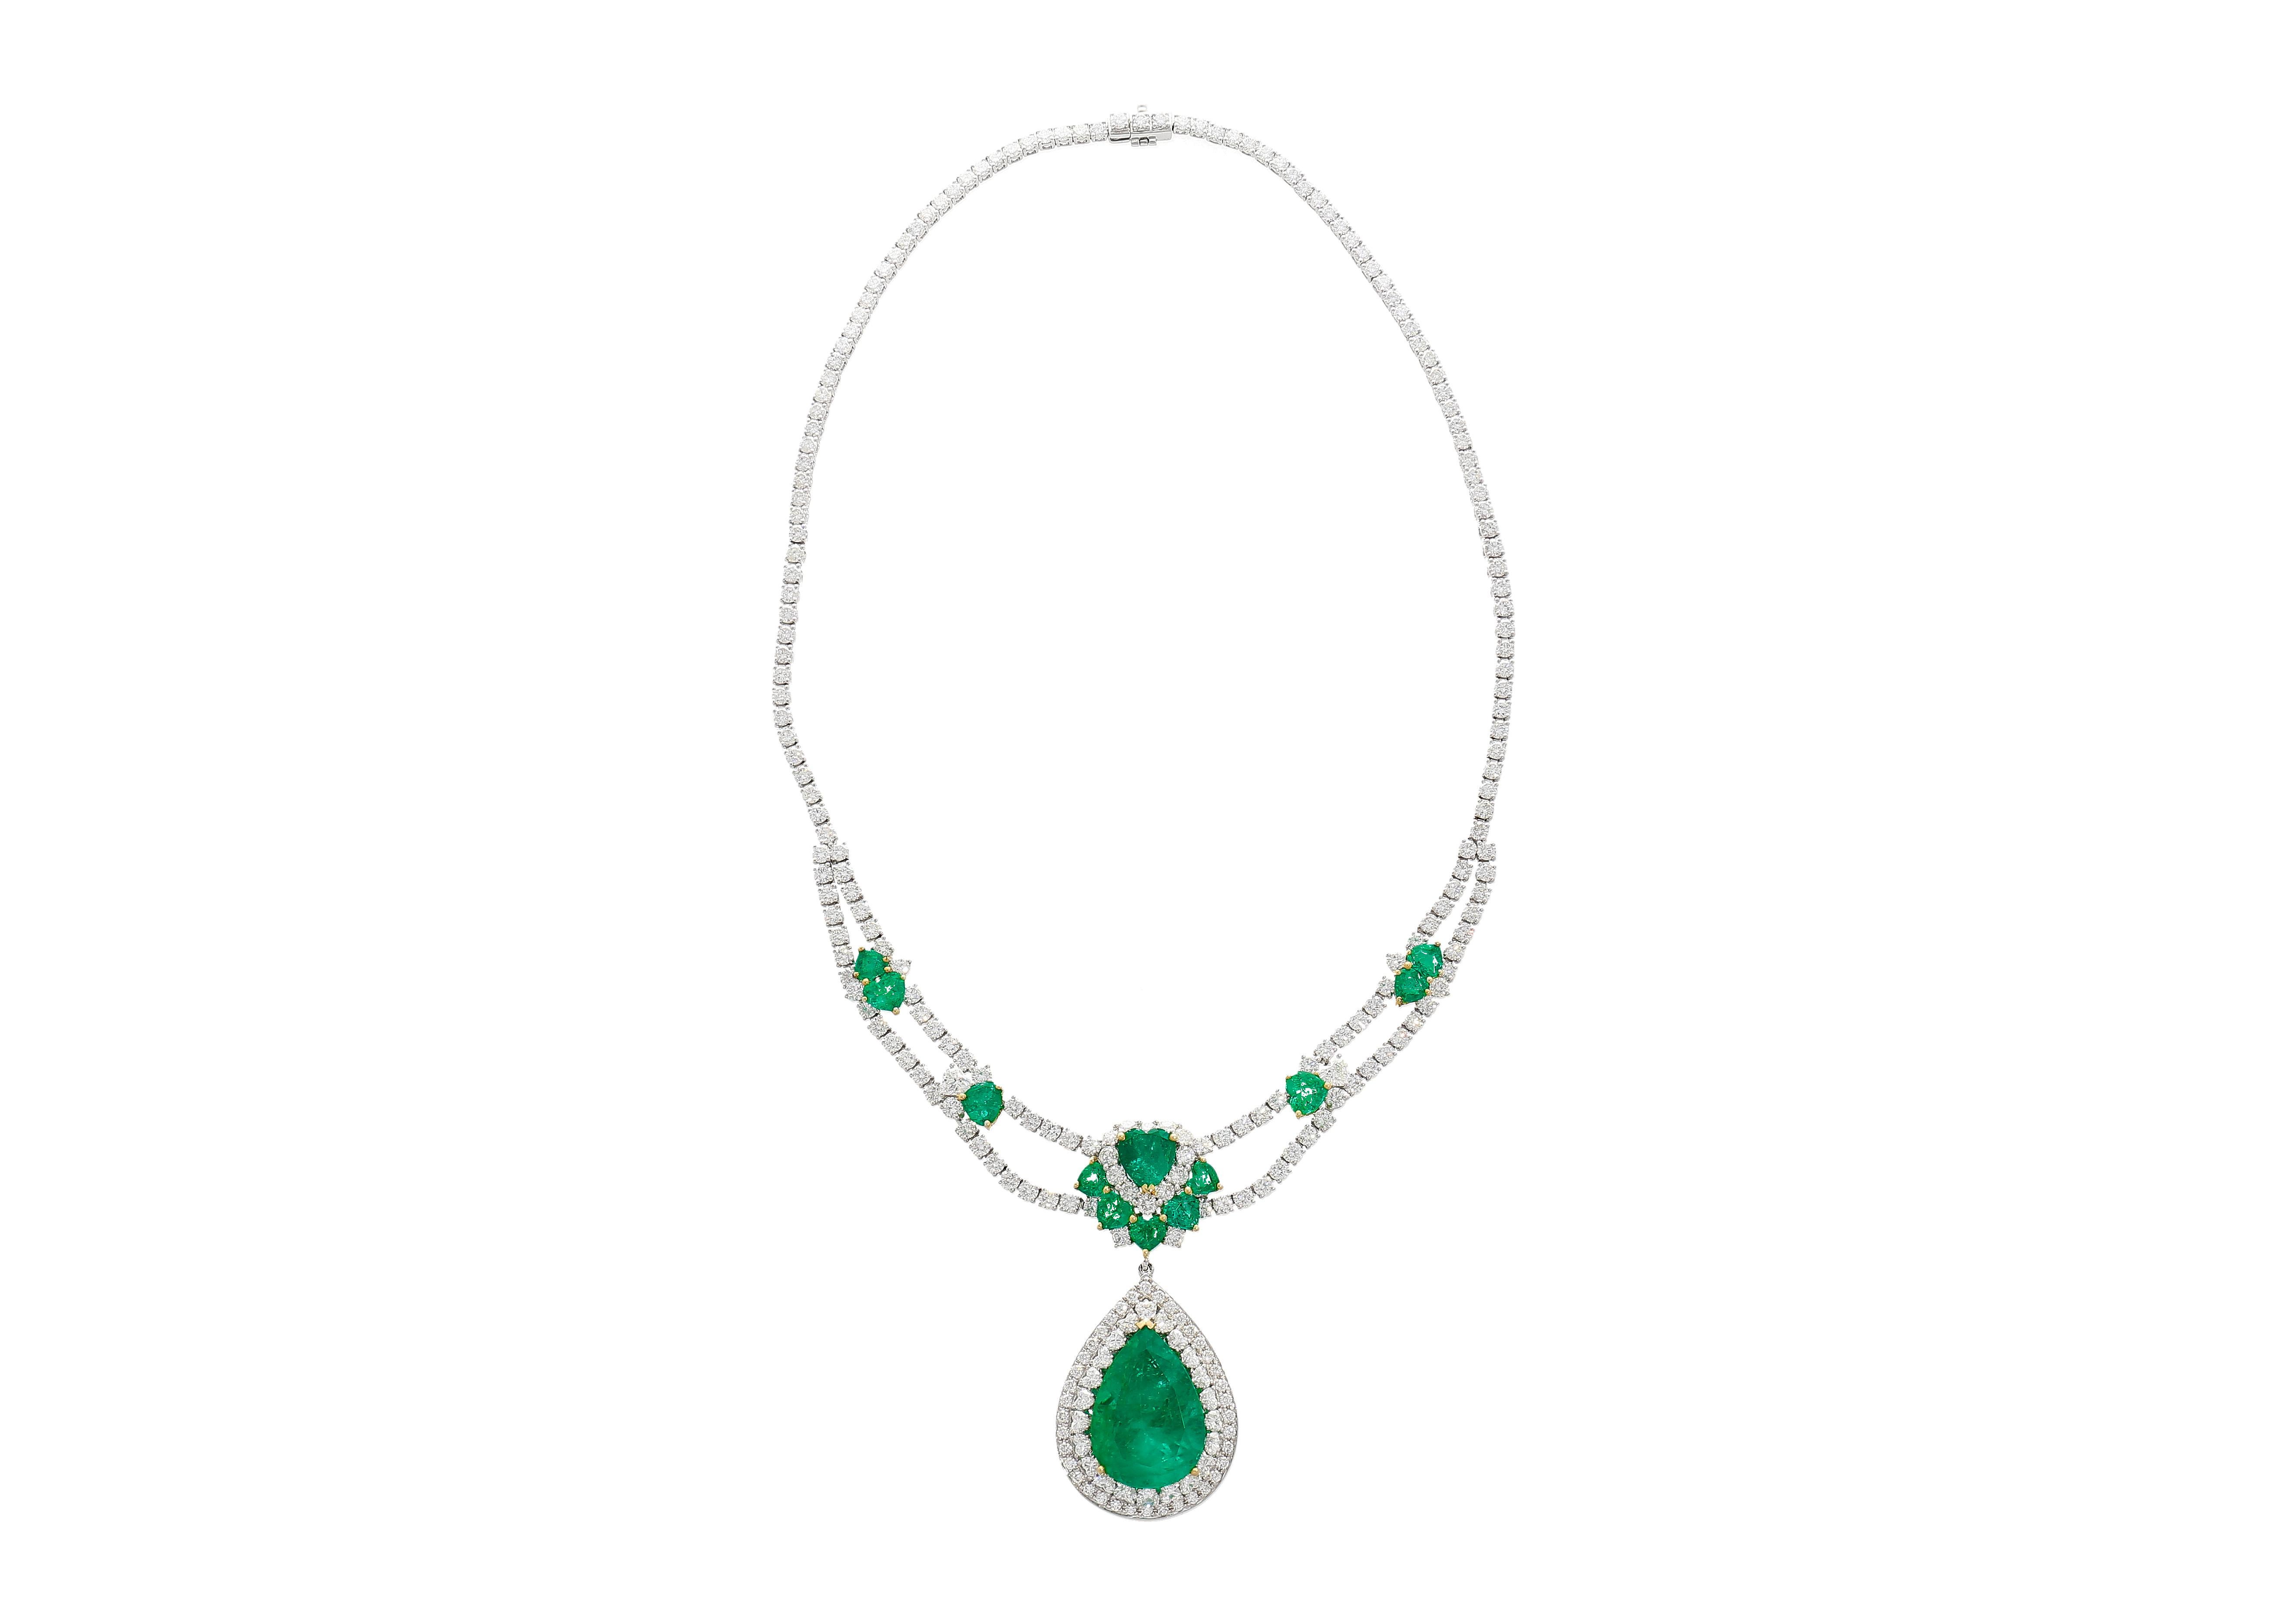 45.58 Carat total chandelier drop necklace in 18k white gold. Featuring a GRS certified 18.82 carat Colombian emerald center stone with adorning heart cut emeralds and diamonds. Fixed on a tennis necklace chain that echoes a symbol of sophistication